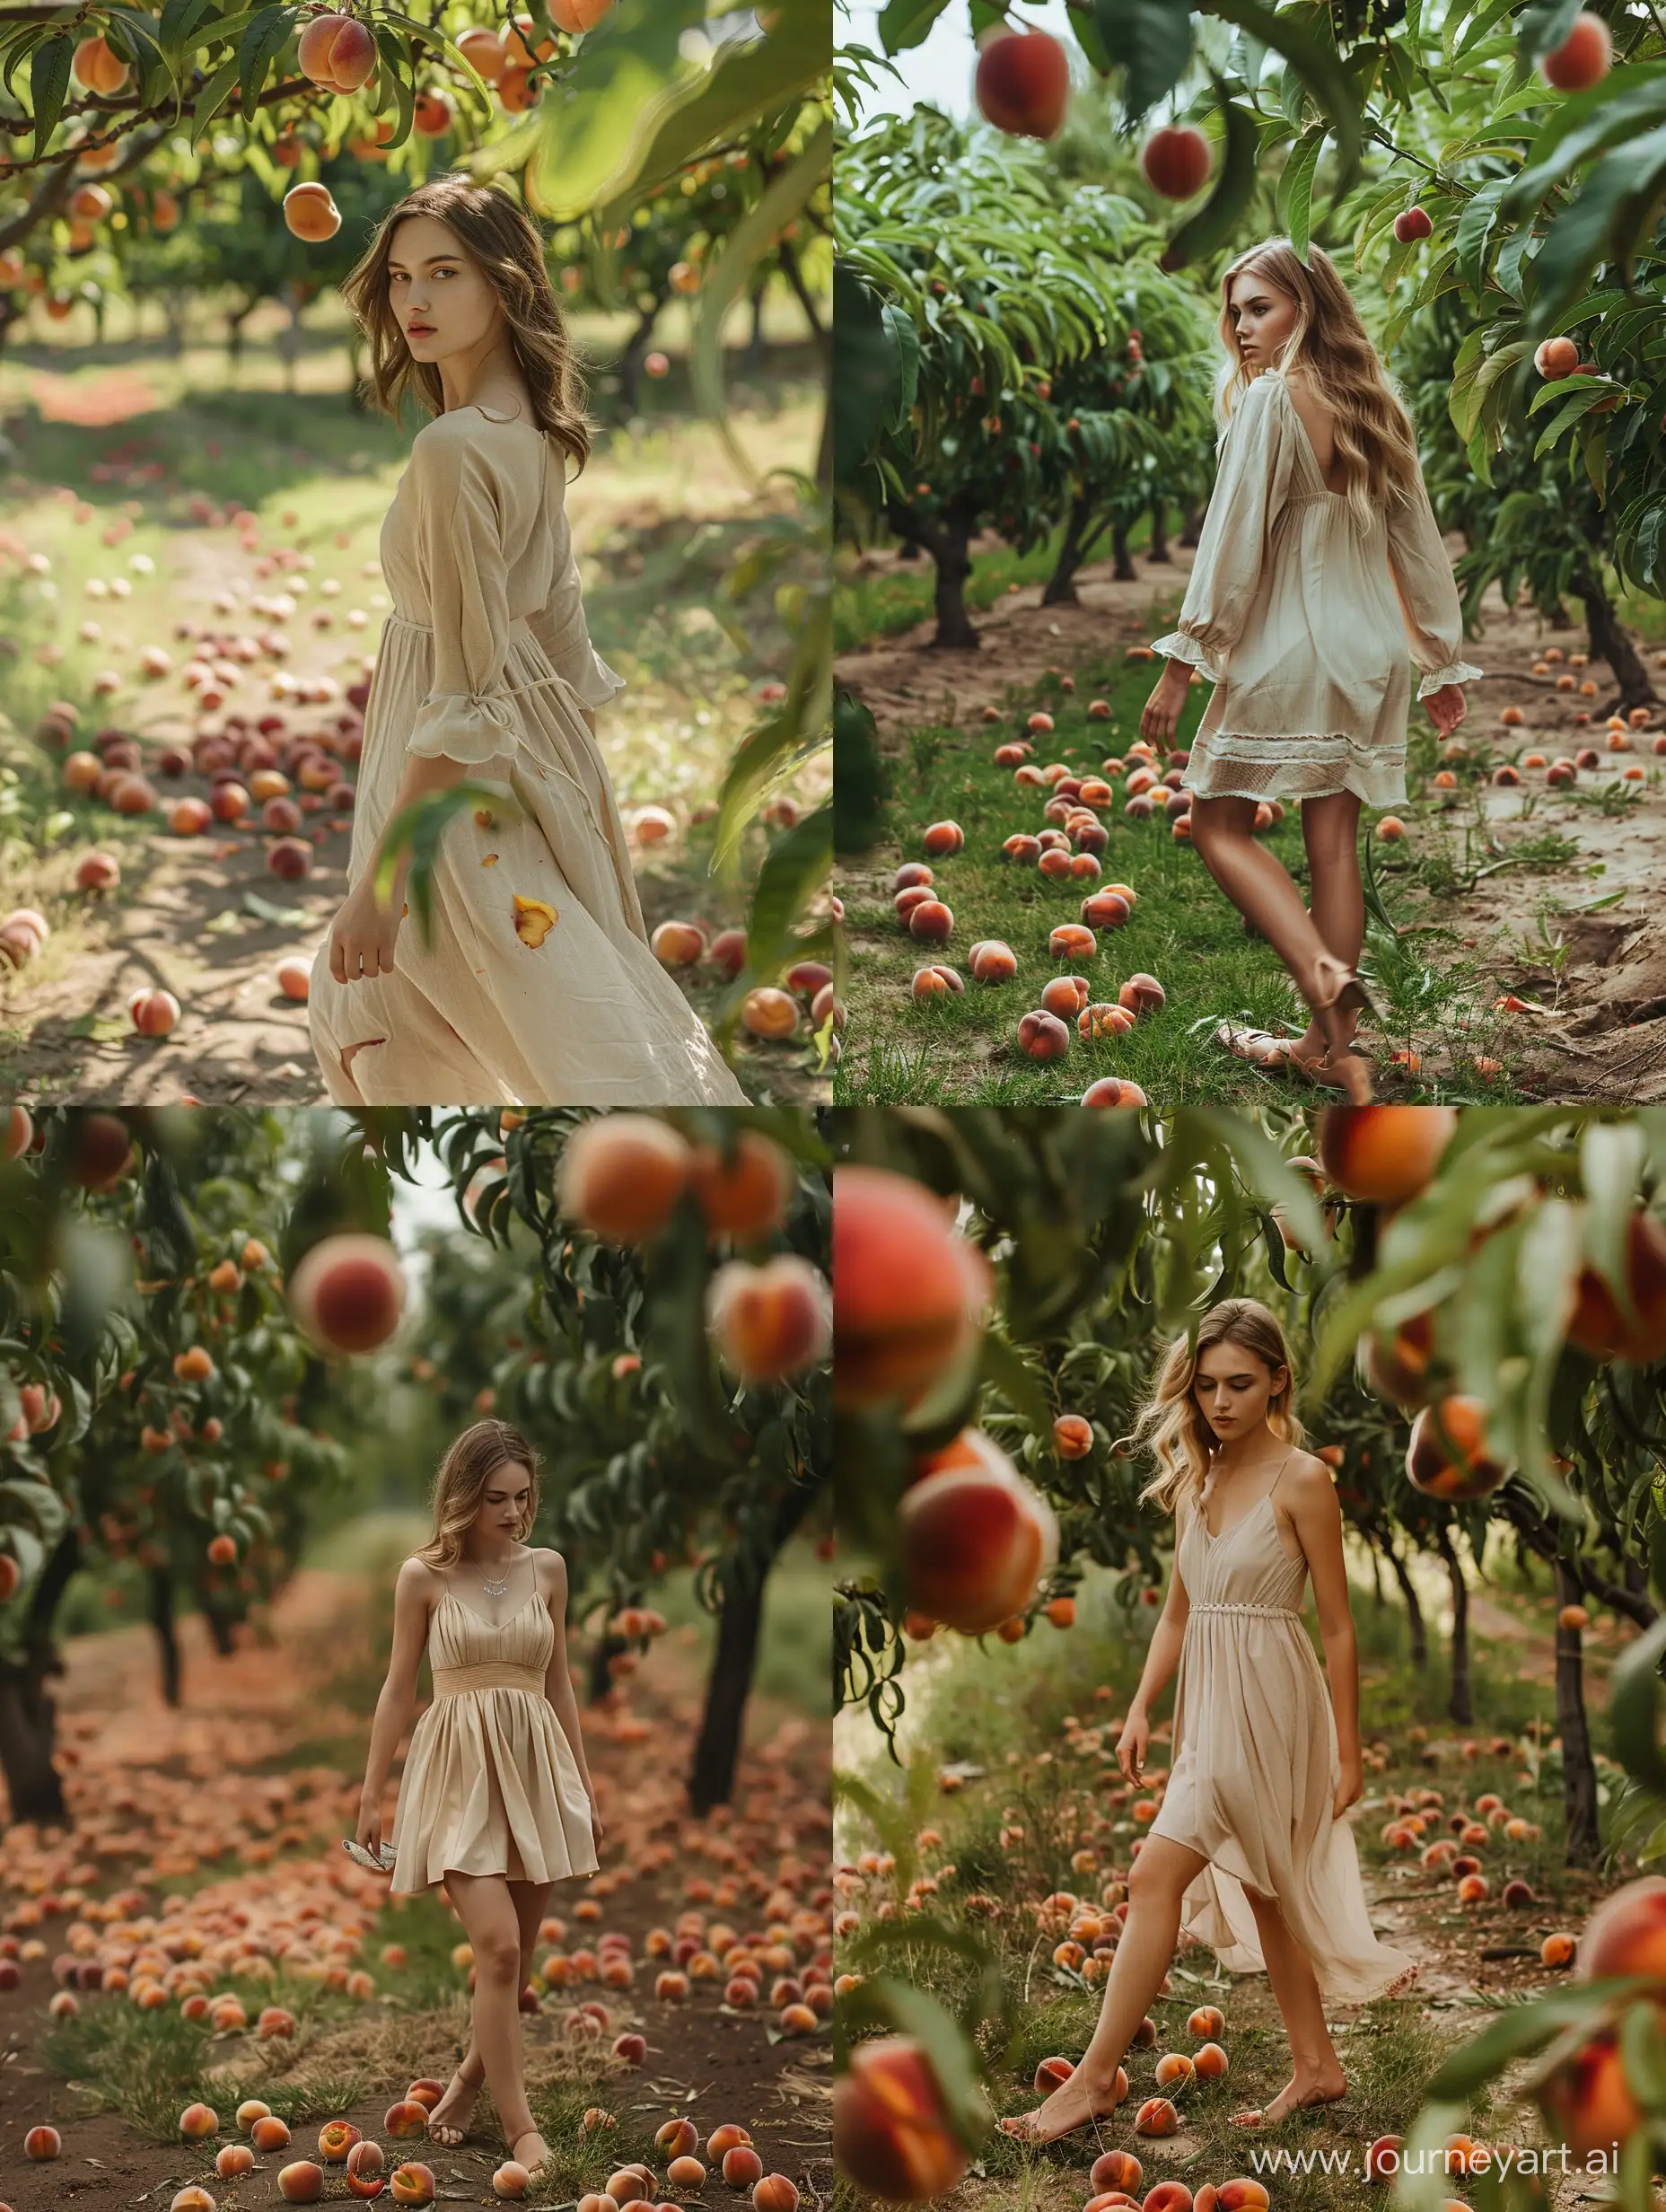 A very beautiful girl of 25 with fair skin in a light beige dress is walking through an orchard with peach trees under which fallen peaches are lying